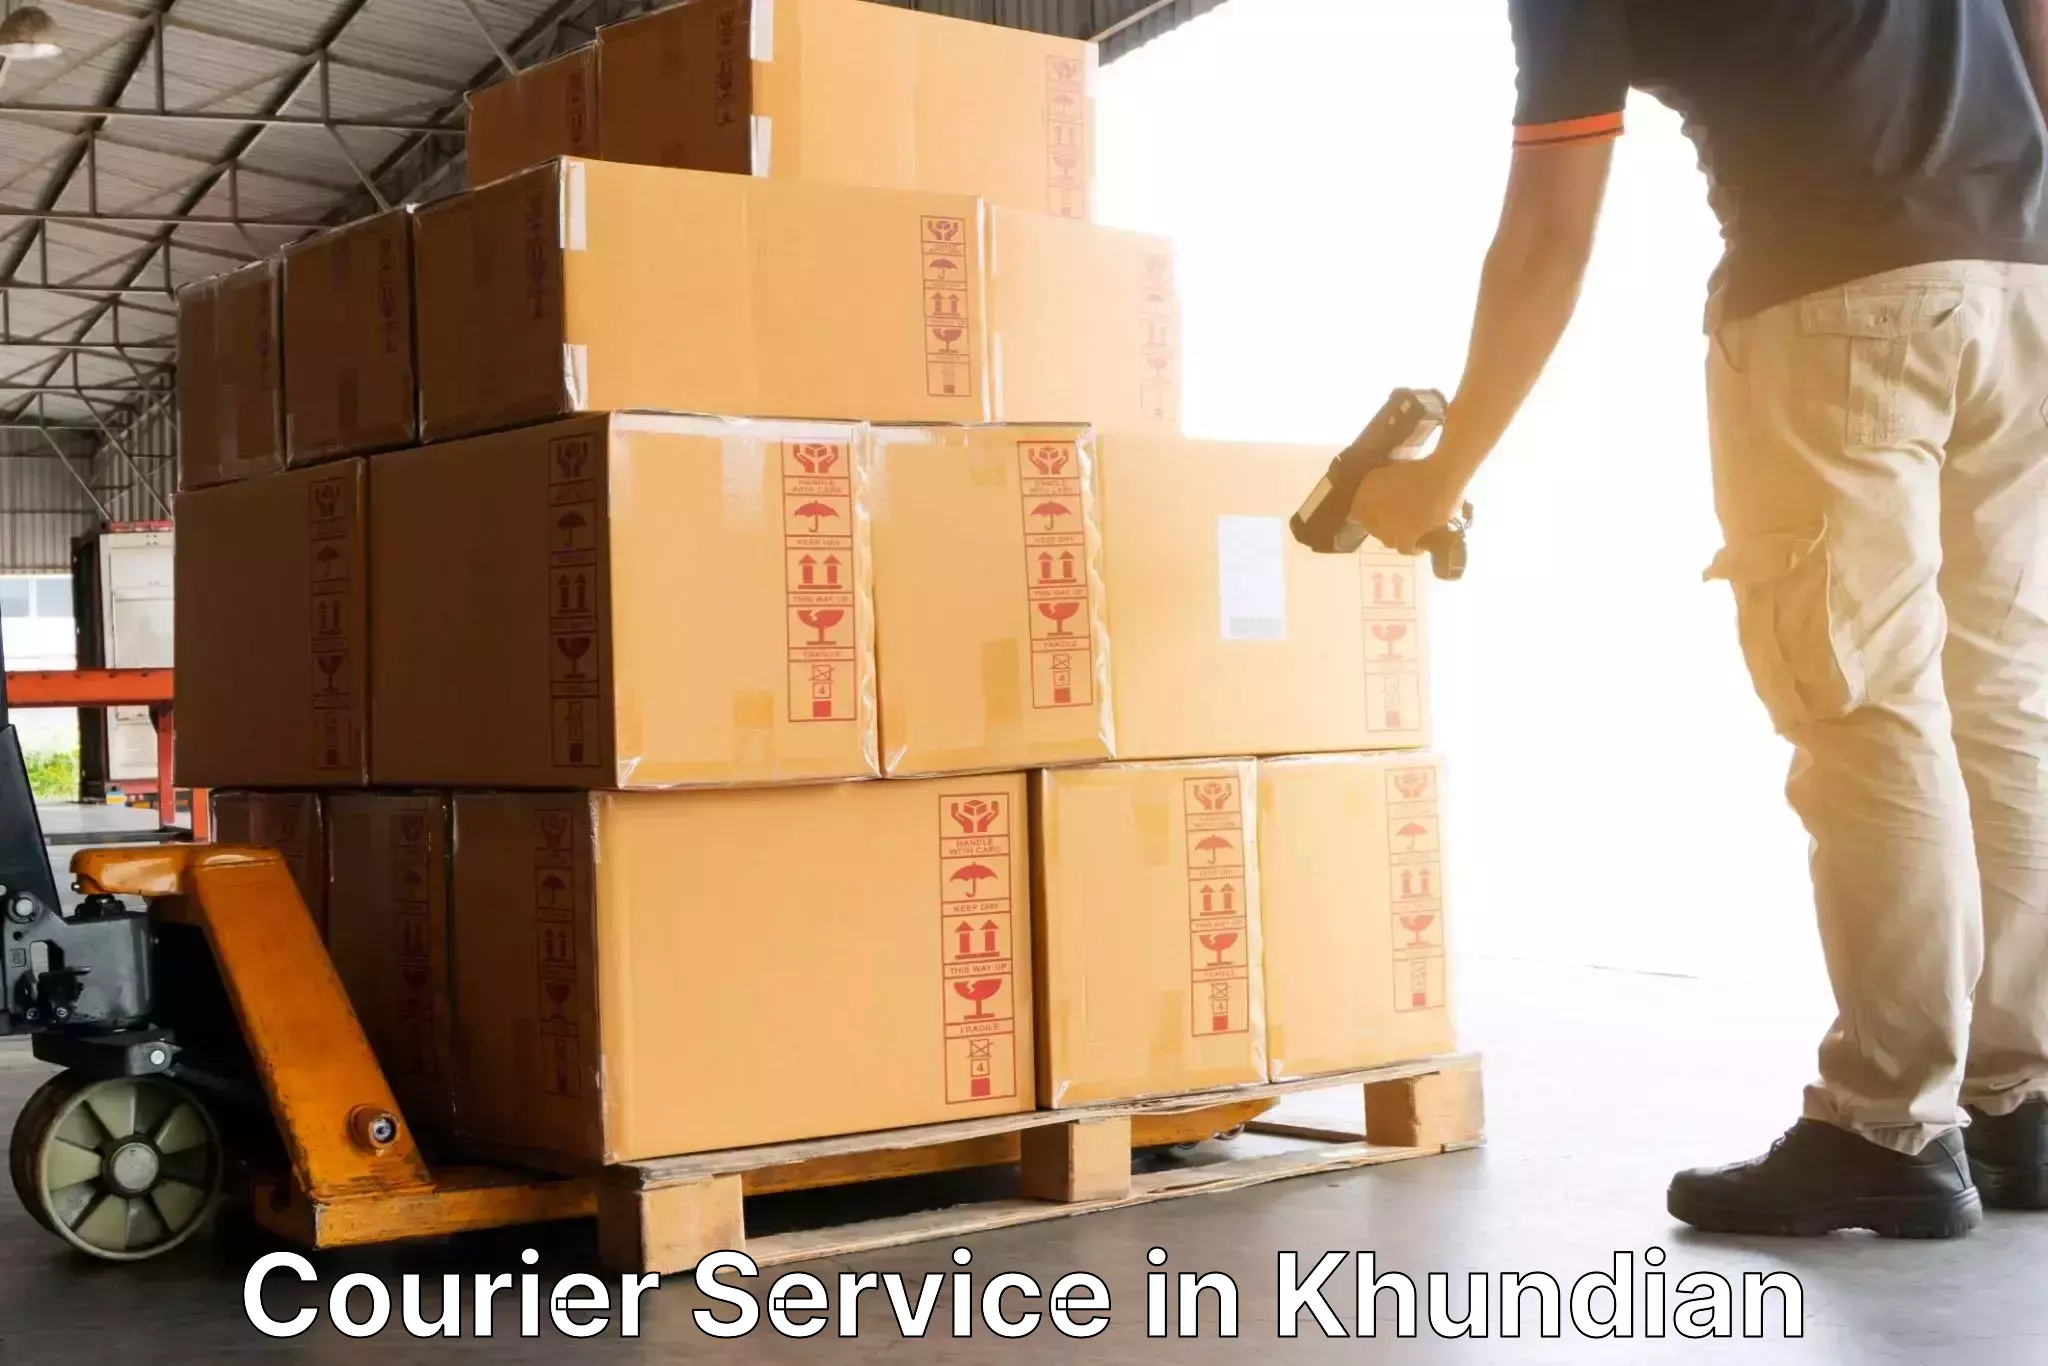 Courier service efficiency in Khundian